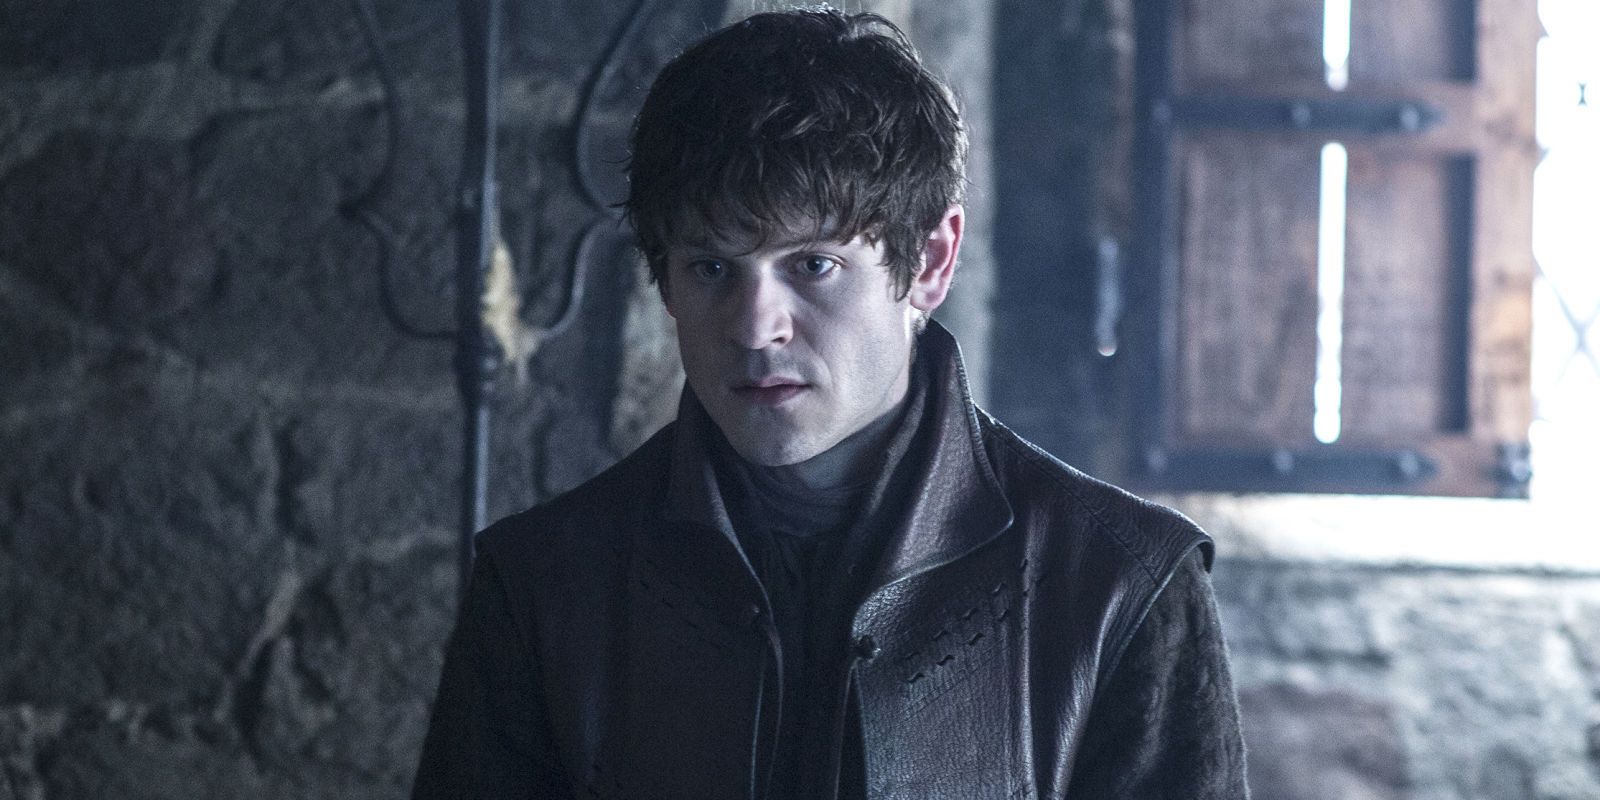 Iwan Rheon as Ramsay Bolton in Game of Thrones